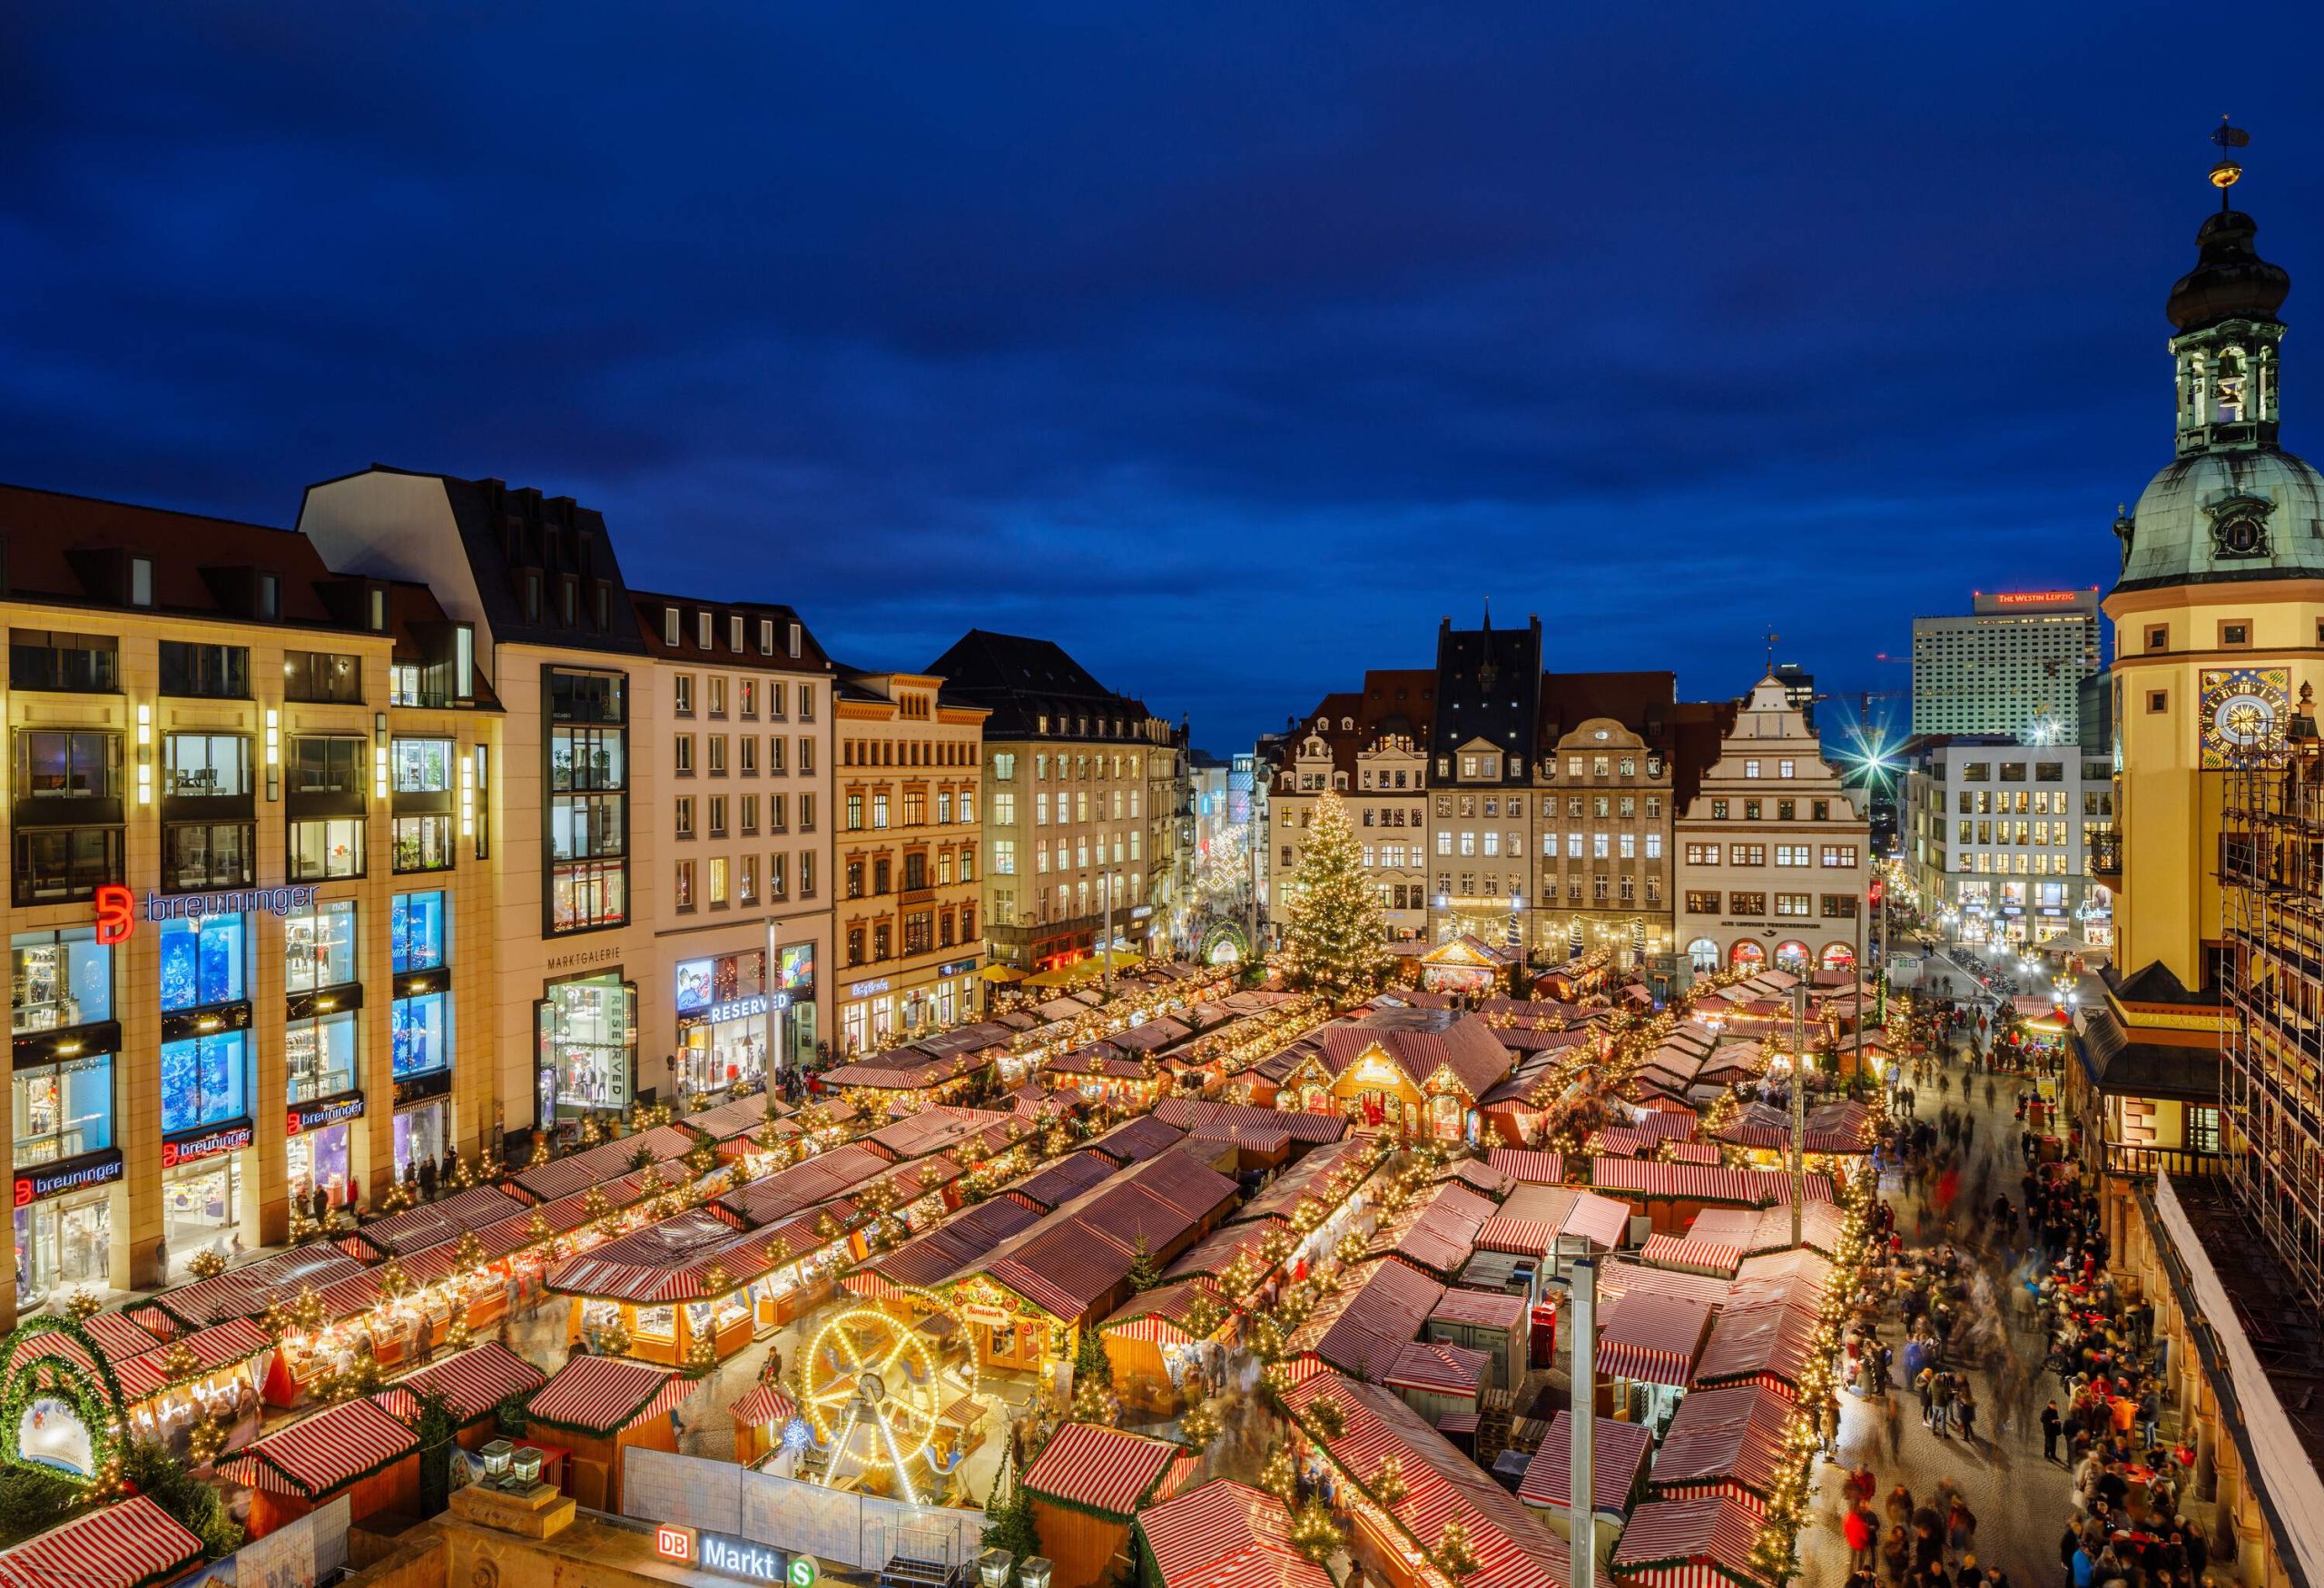 A market filled with holiday-decorated stores and bordered by structures.